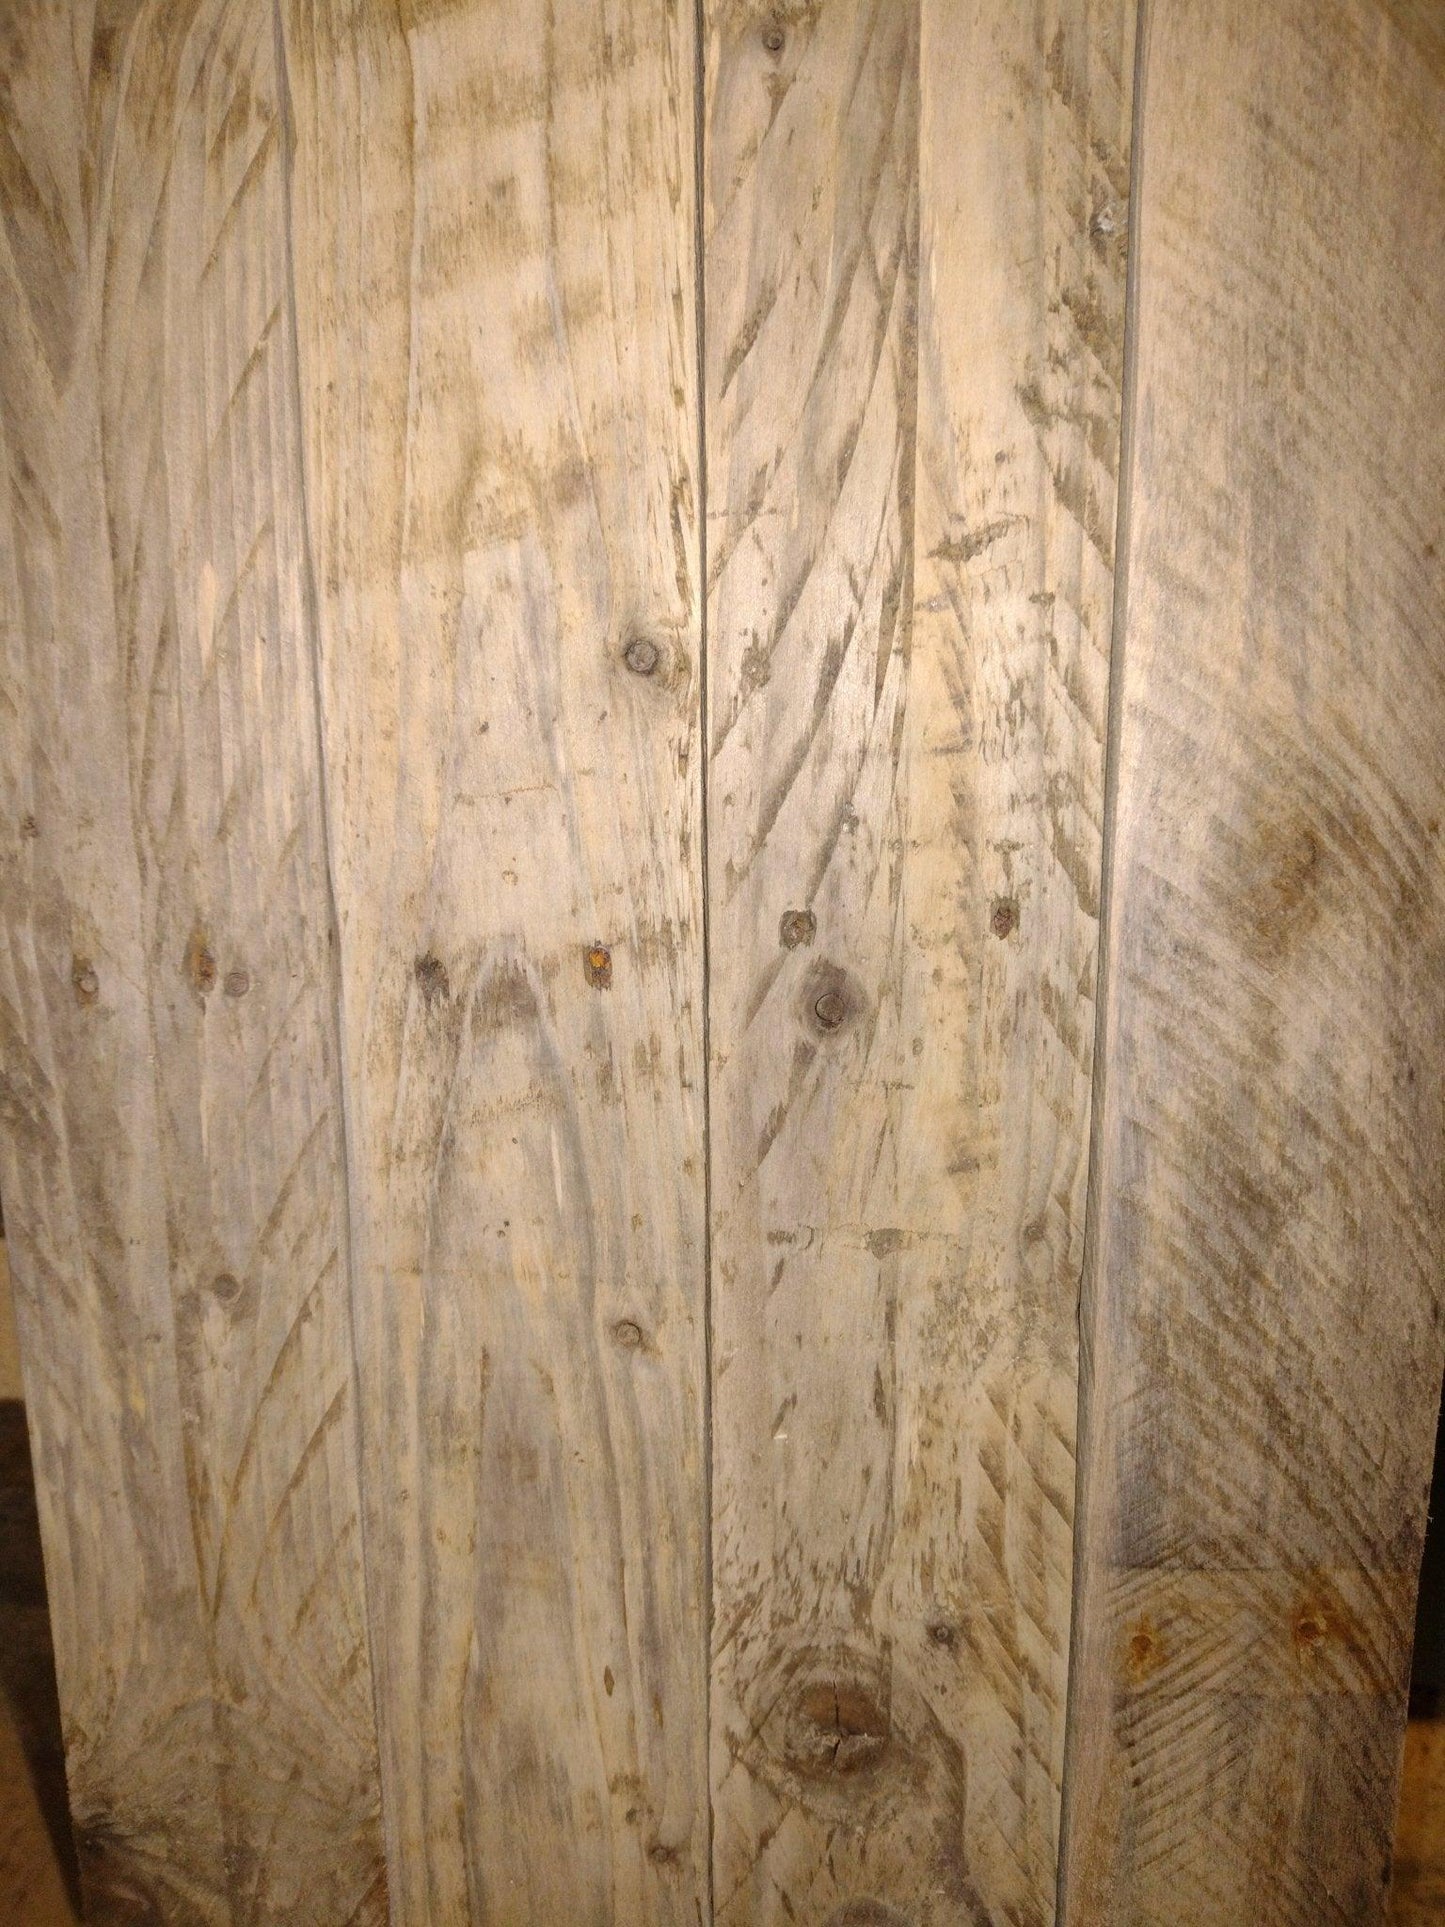 500 board planks reclaimed wood reclaimed recycled for wall cladding - Anpio woods ltd